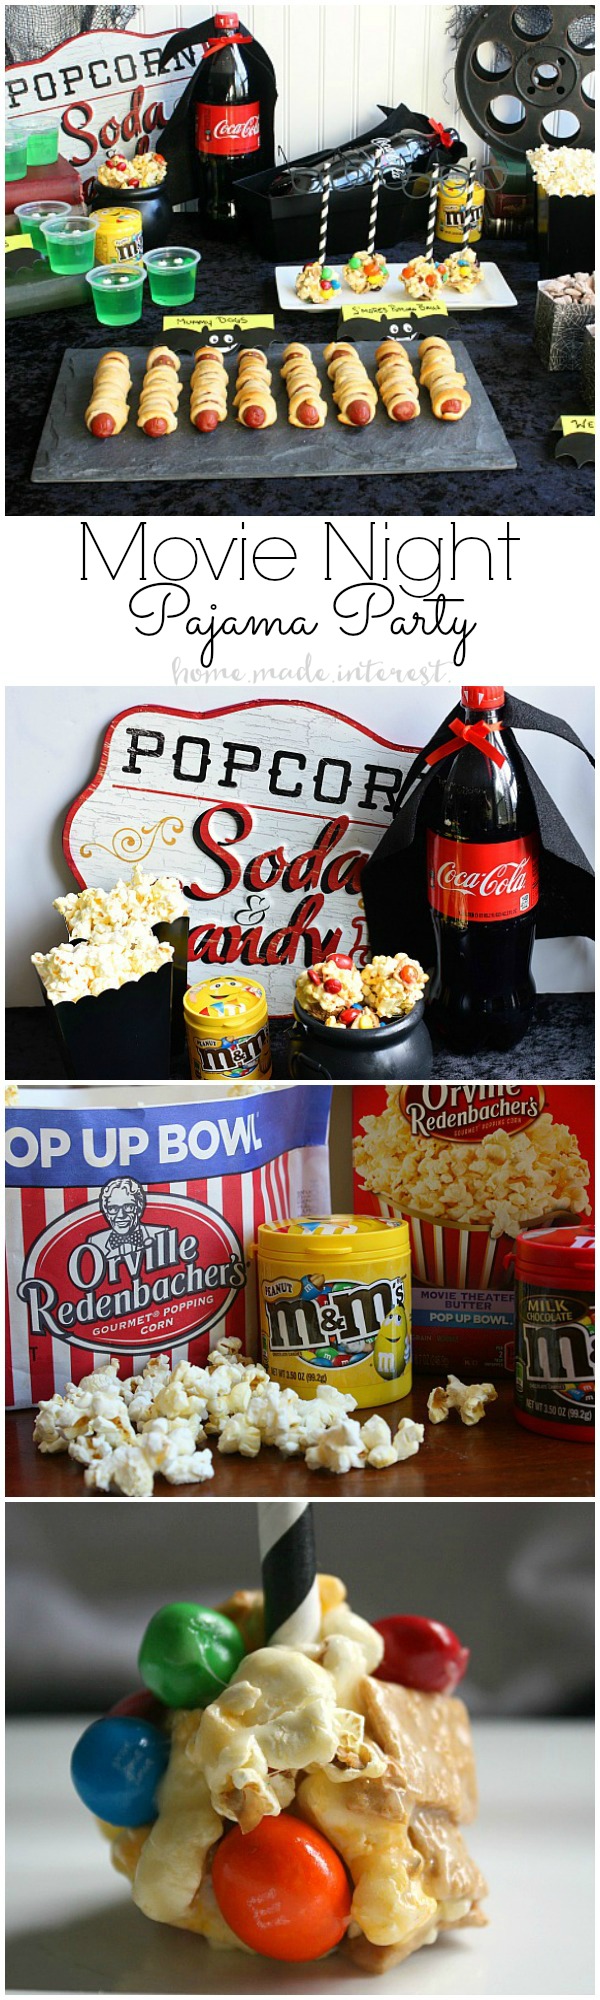  Pajama Party Movie Night - Put on your favorite PJs and grab some snacks, this Pajama party Movie night party with Hotel Transylvania 2 is the perfect way to entertain the kids when the weather gets cold and they can’t go out and play. Sticky, salty and sweet S’Mores Popcorn balls are made with M&M’s and movie theater microwave popcorn for the perfect movie night treat. 